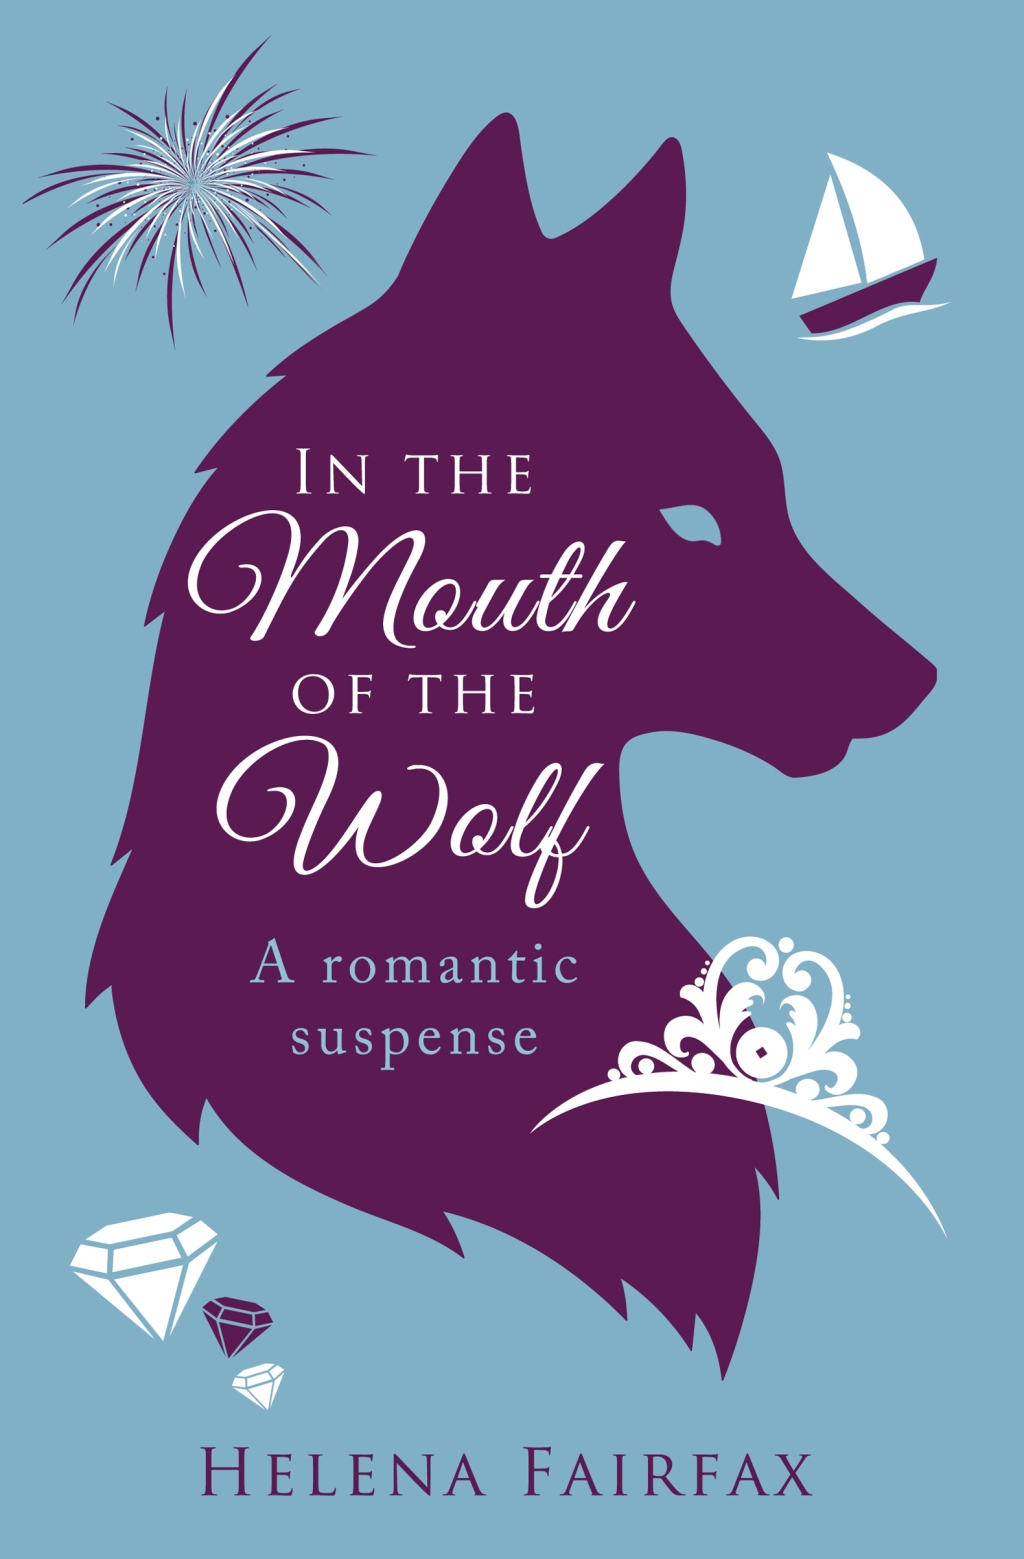 Mystery, superstition and romance in the novel In the Mouth of the Wolf